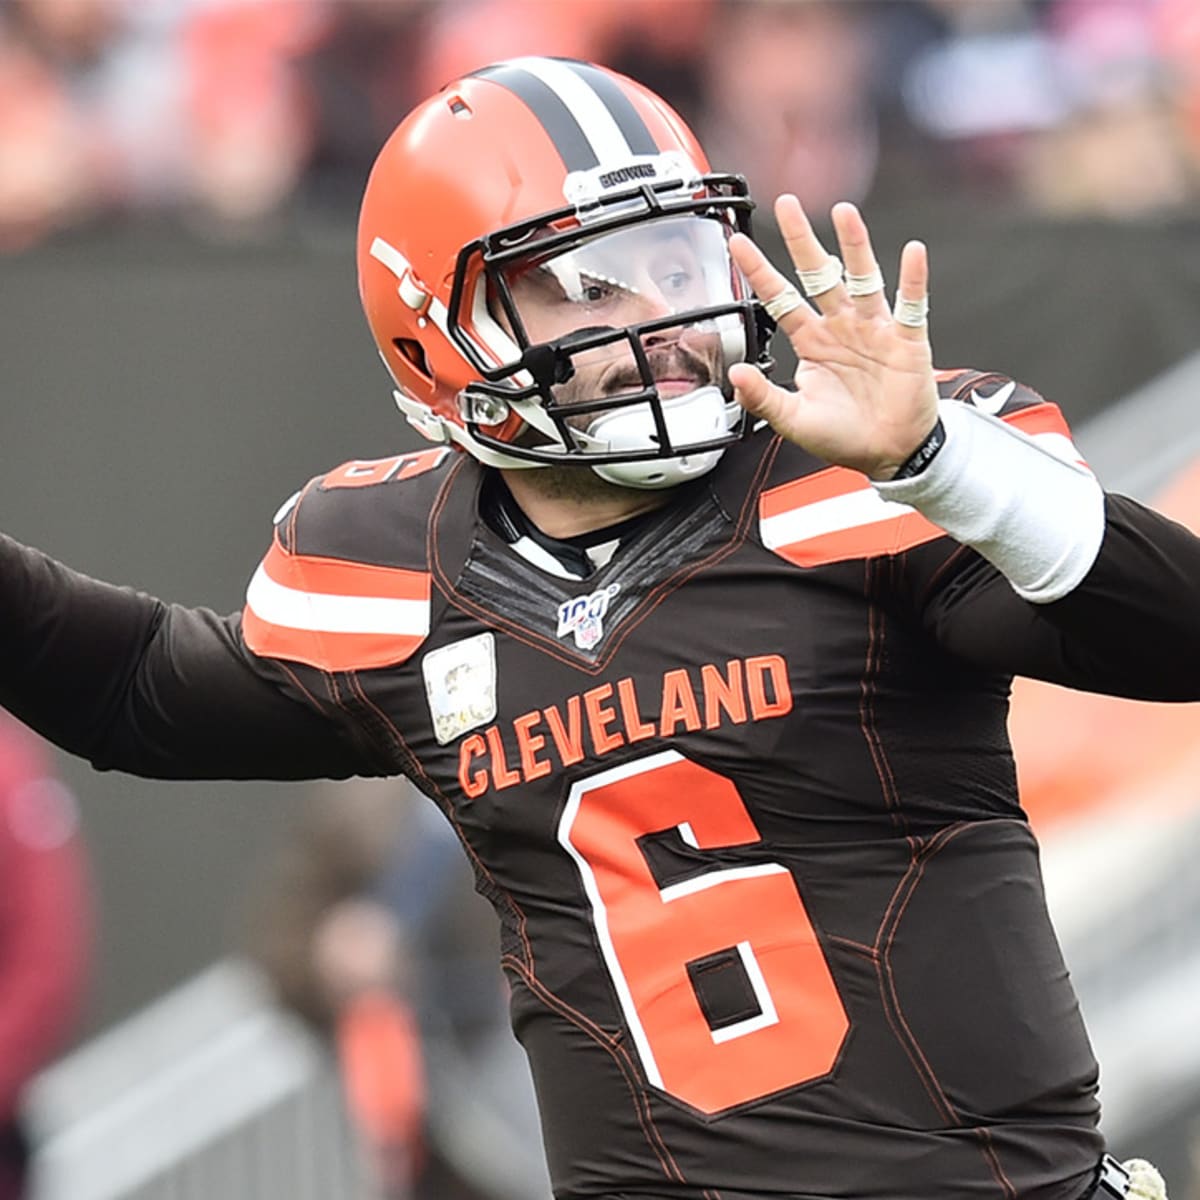 Steelers vs Browns live stream Watch online, TV channel, time